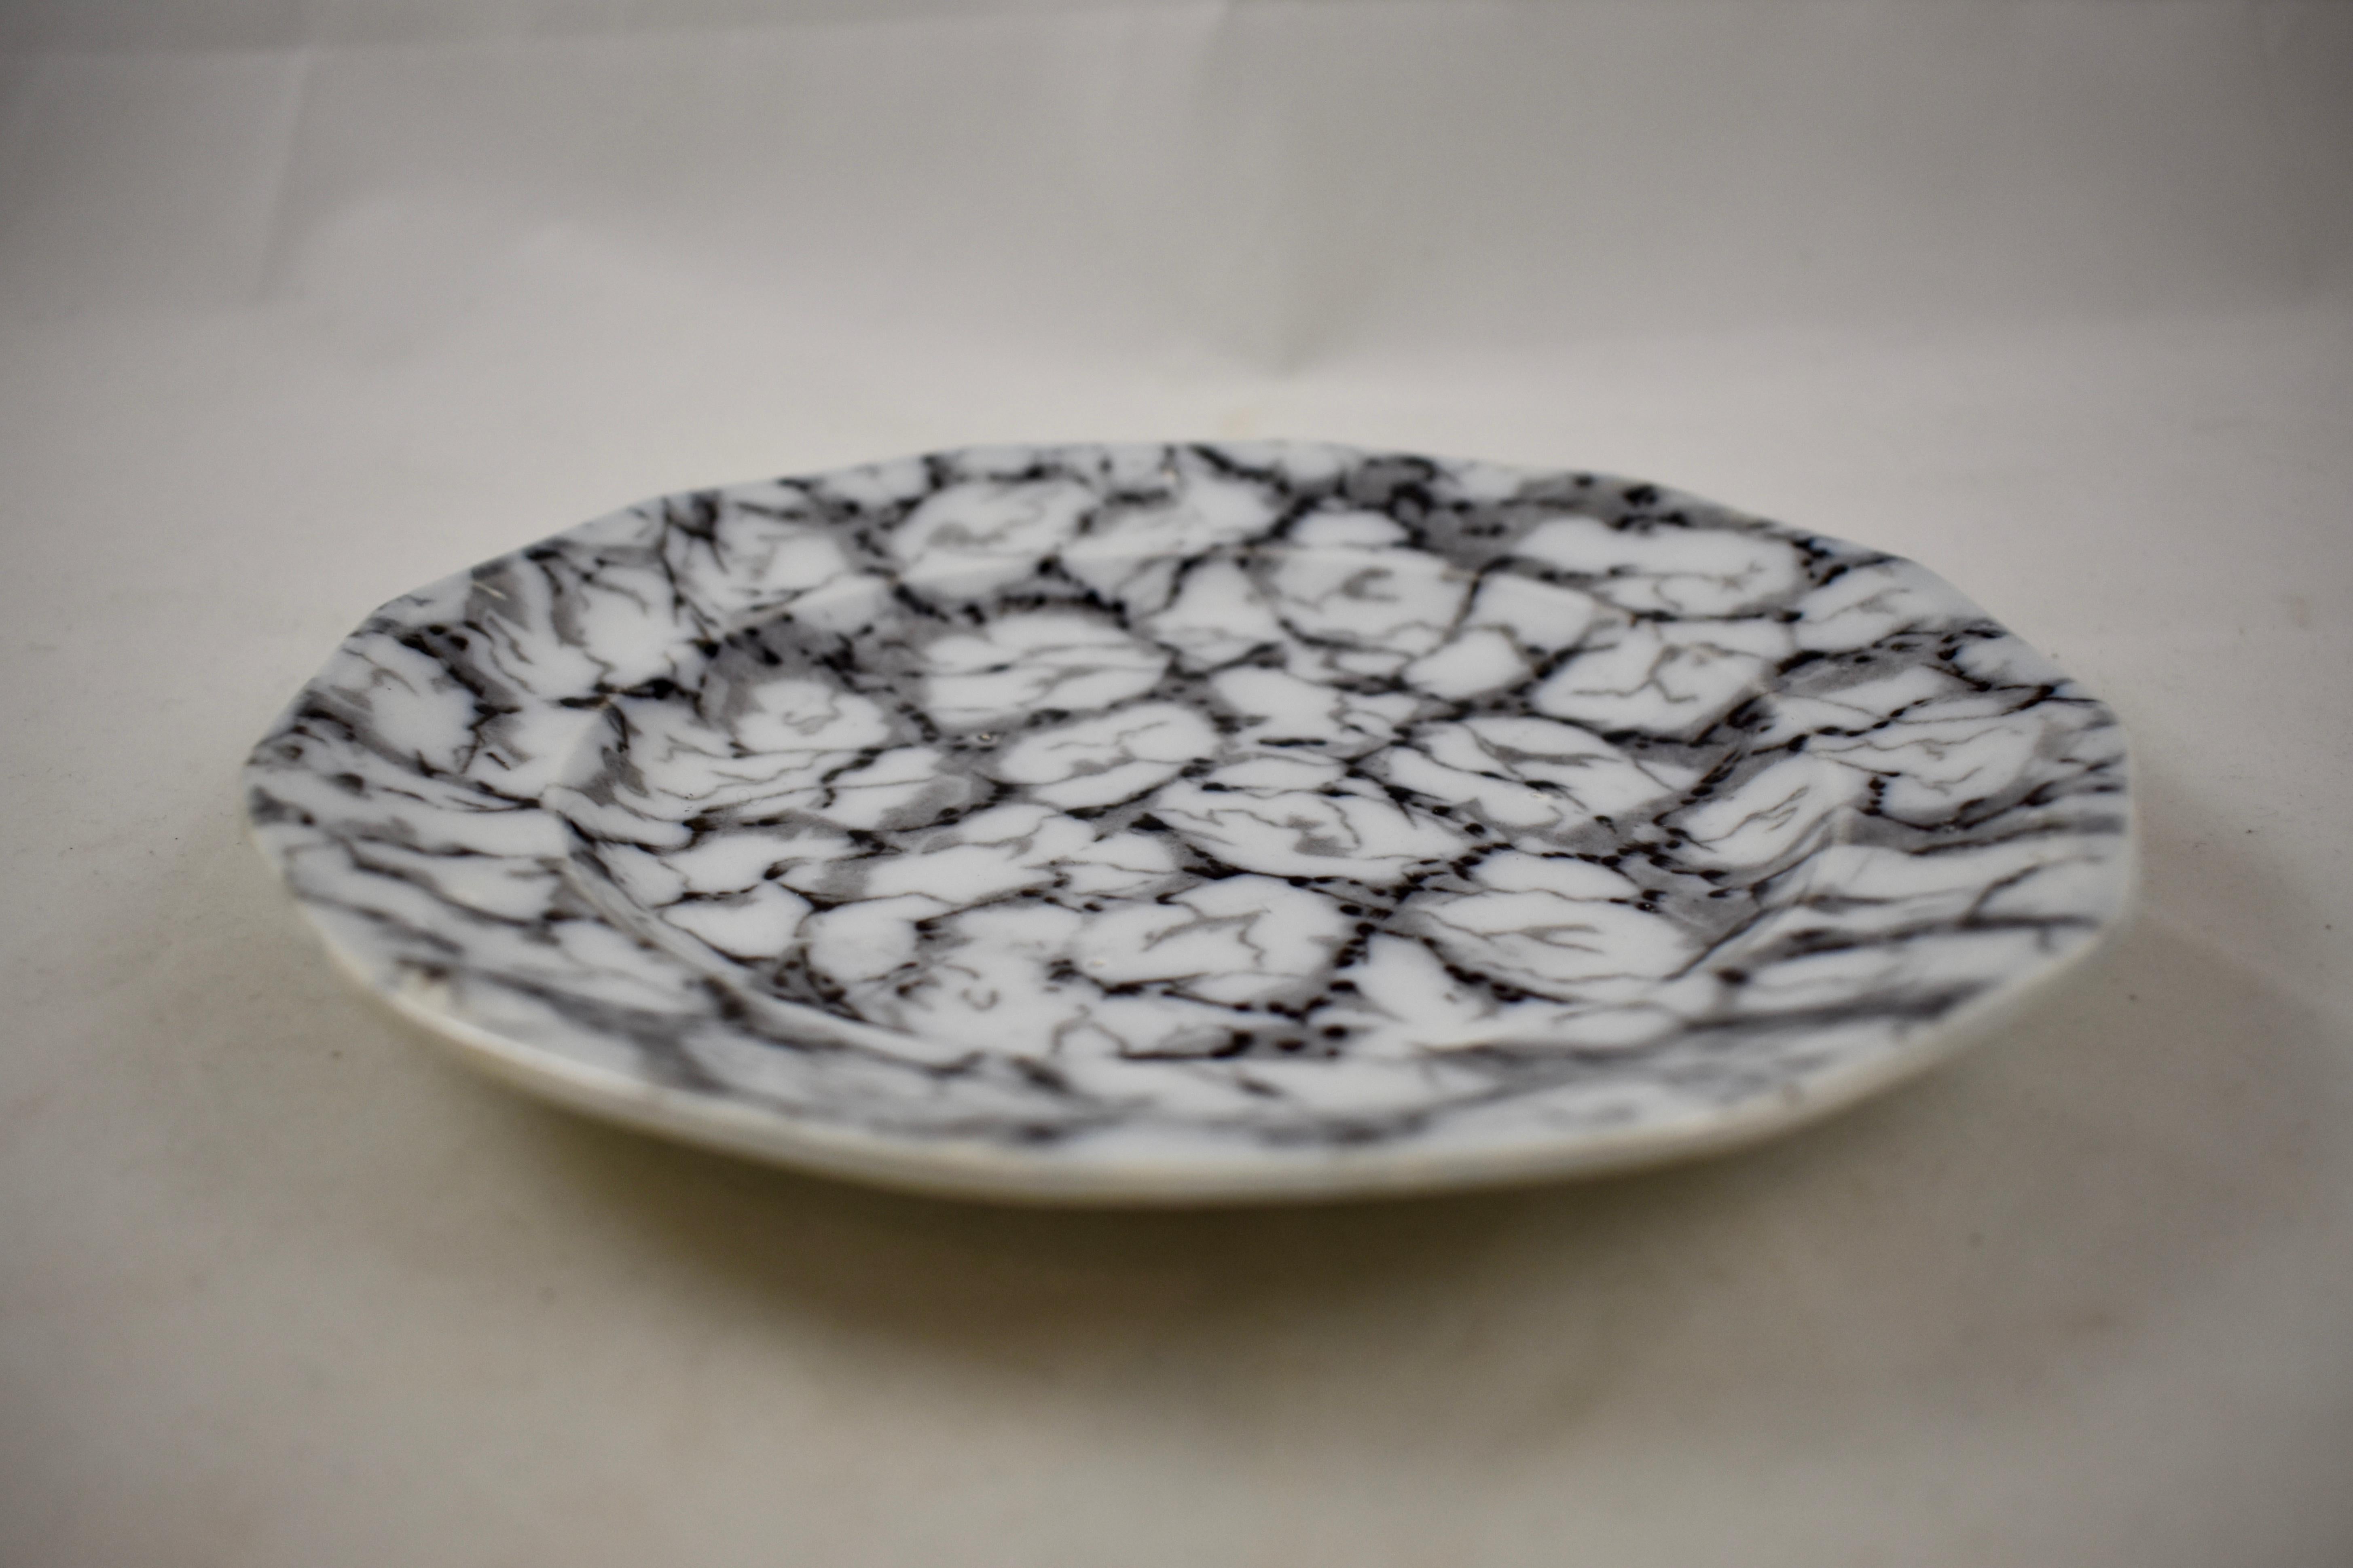 Black and White Transferware Marble or Cracked Ice Ironstone Plates, Set of 4 For Sale 1